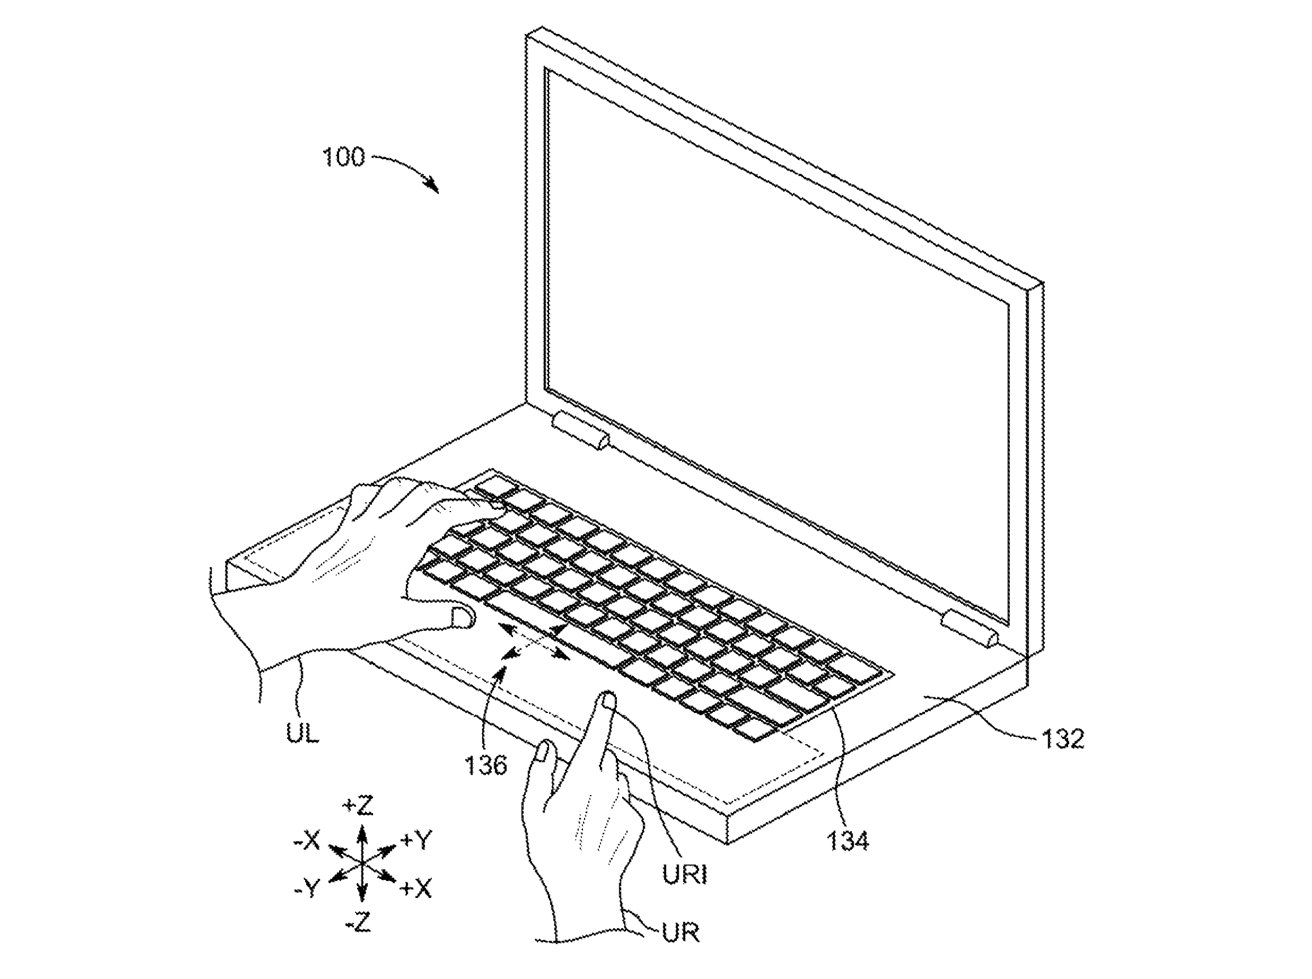 A future trackpad could take up the entire space below the keyboard on a MacBook Pro. 